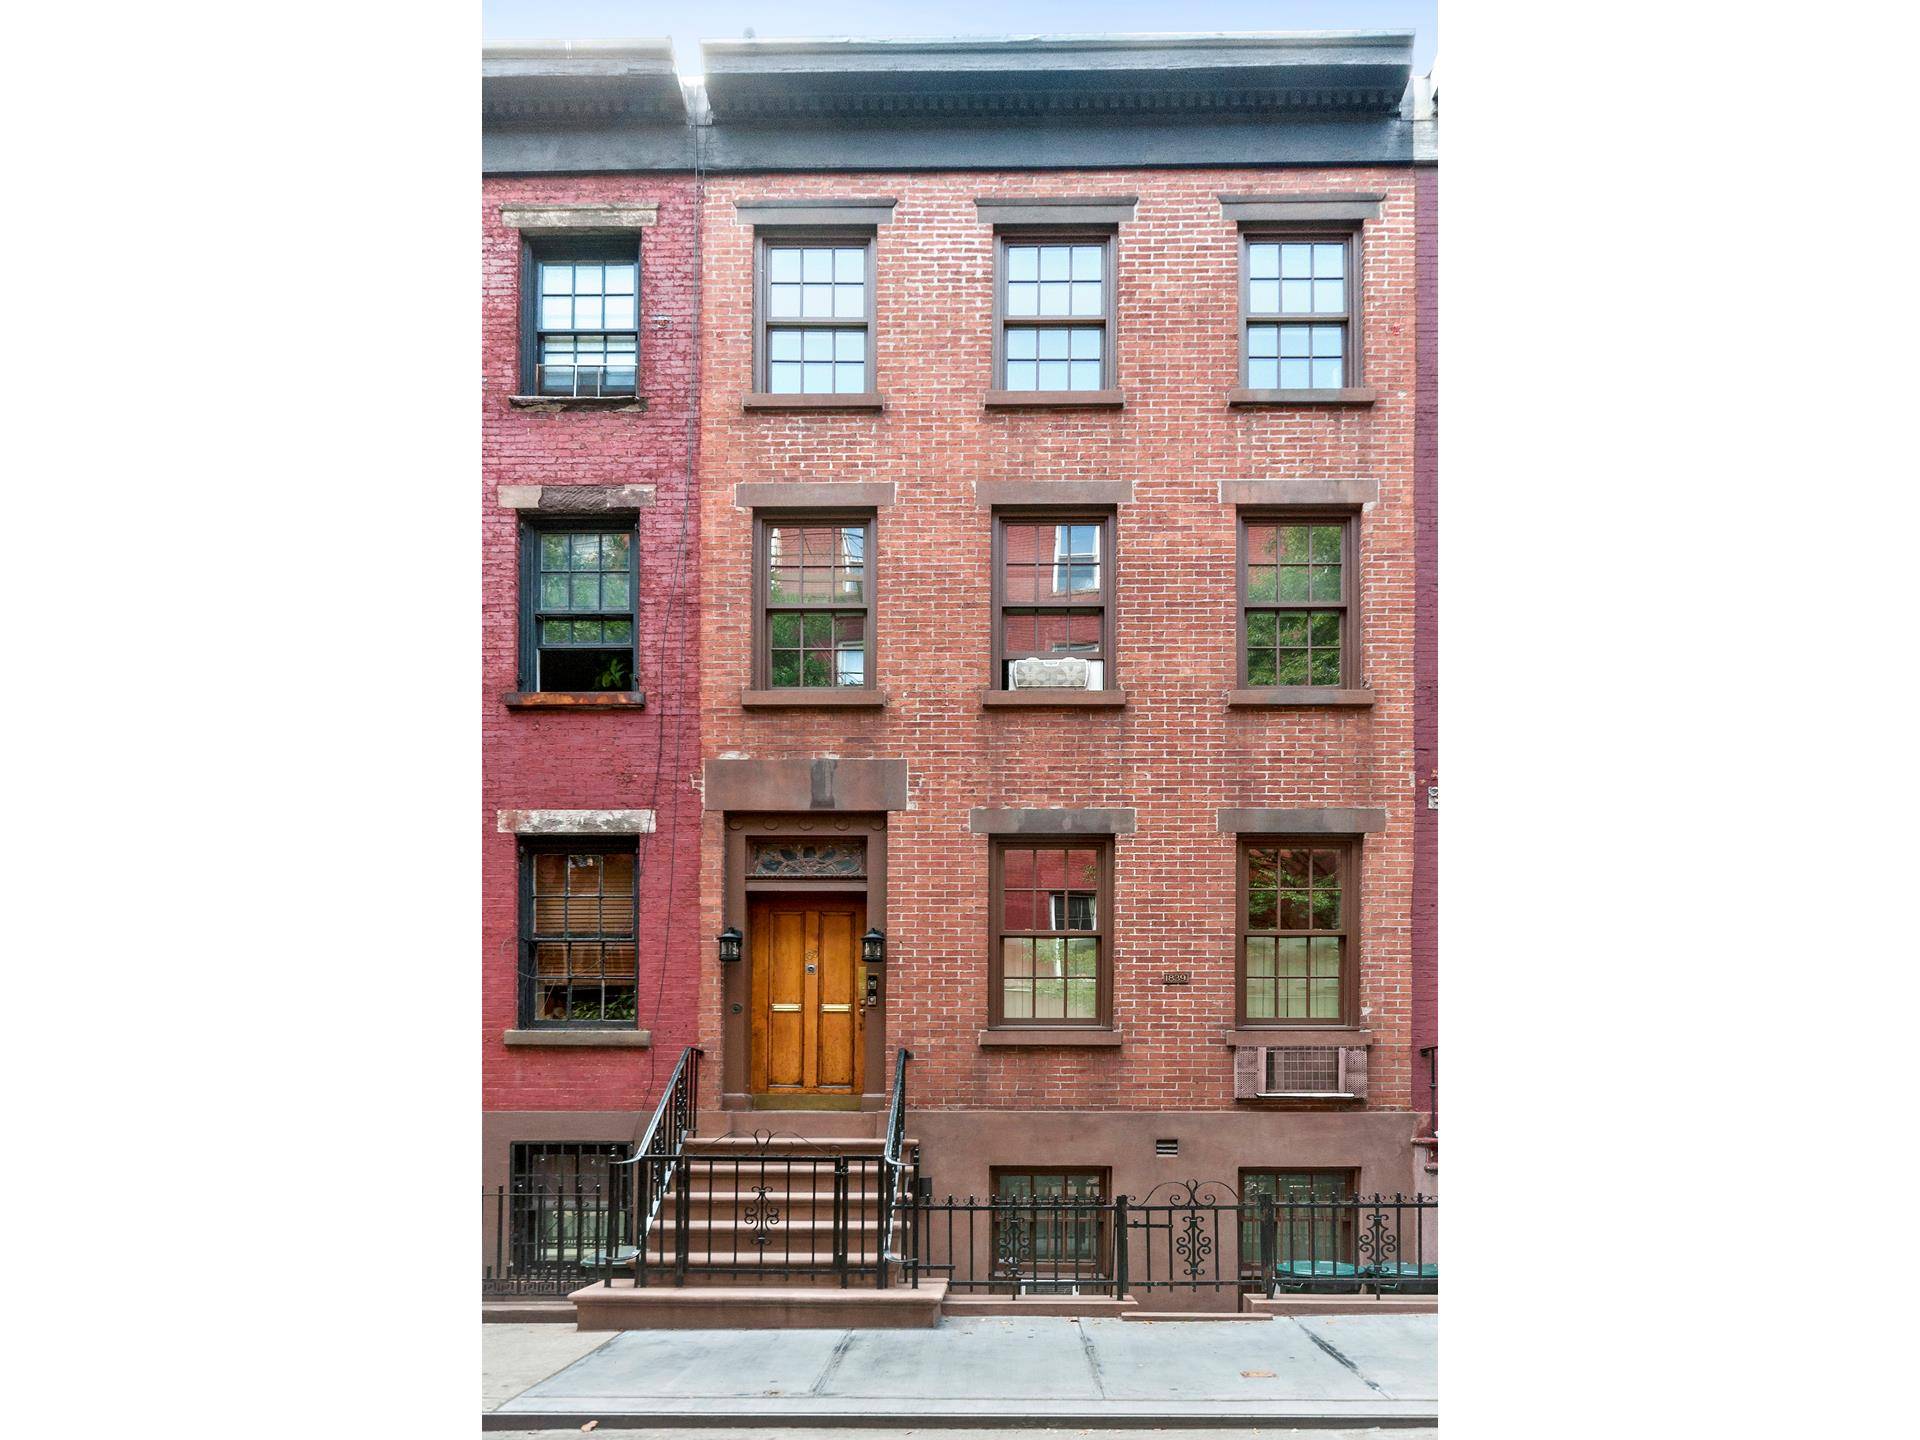 Located on a lovely block in historic landmarked Greenwich Village, this early 1839 Greek revival townhouse was built as one of four houses in a row.